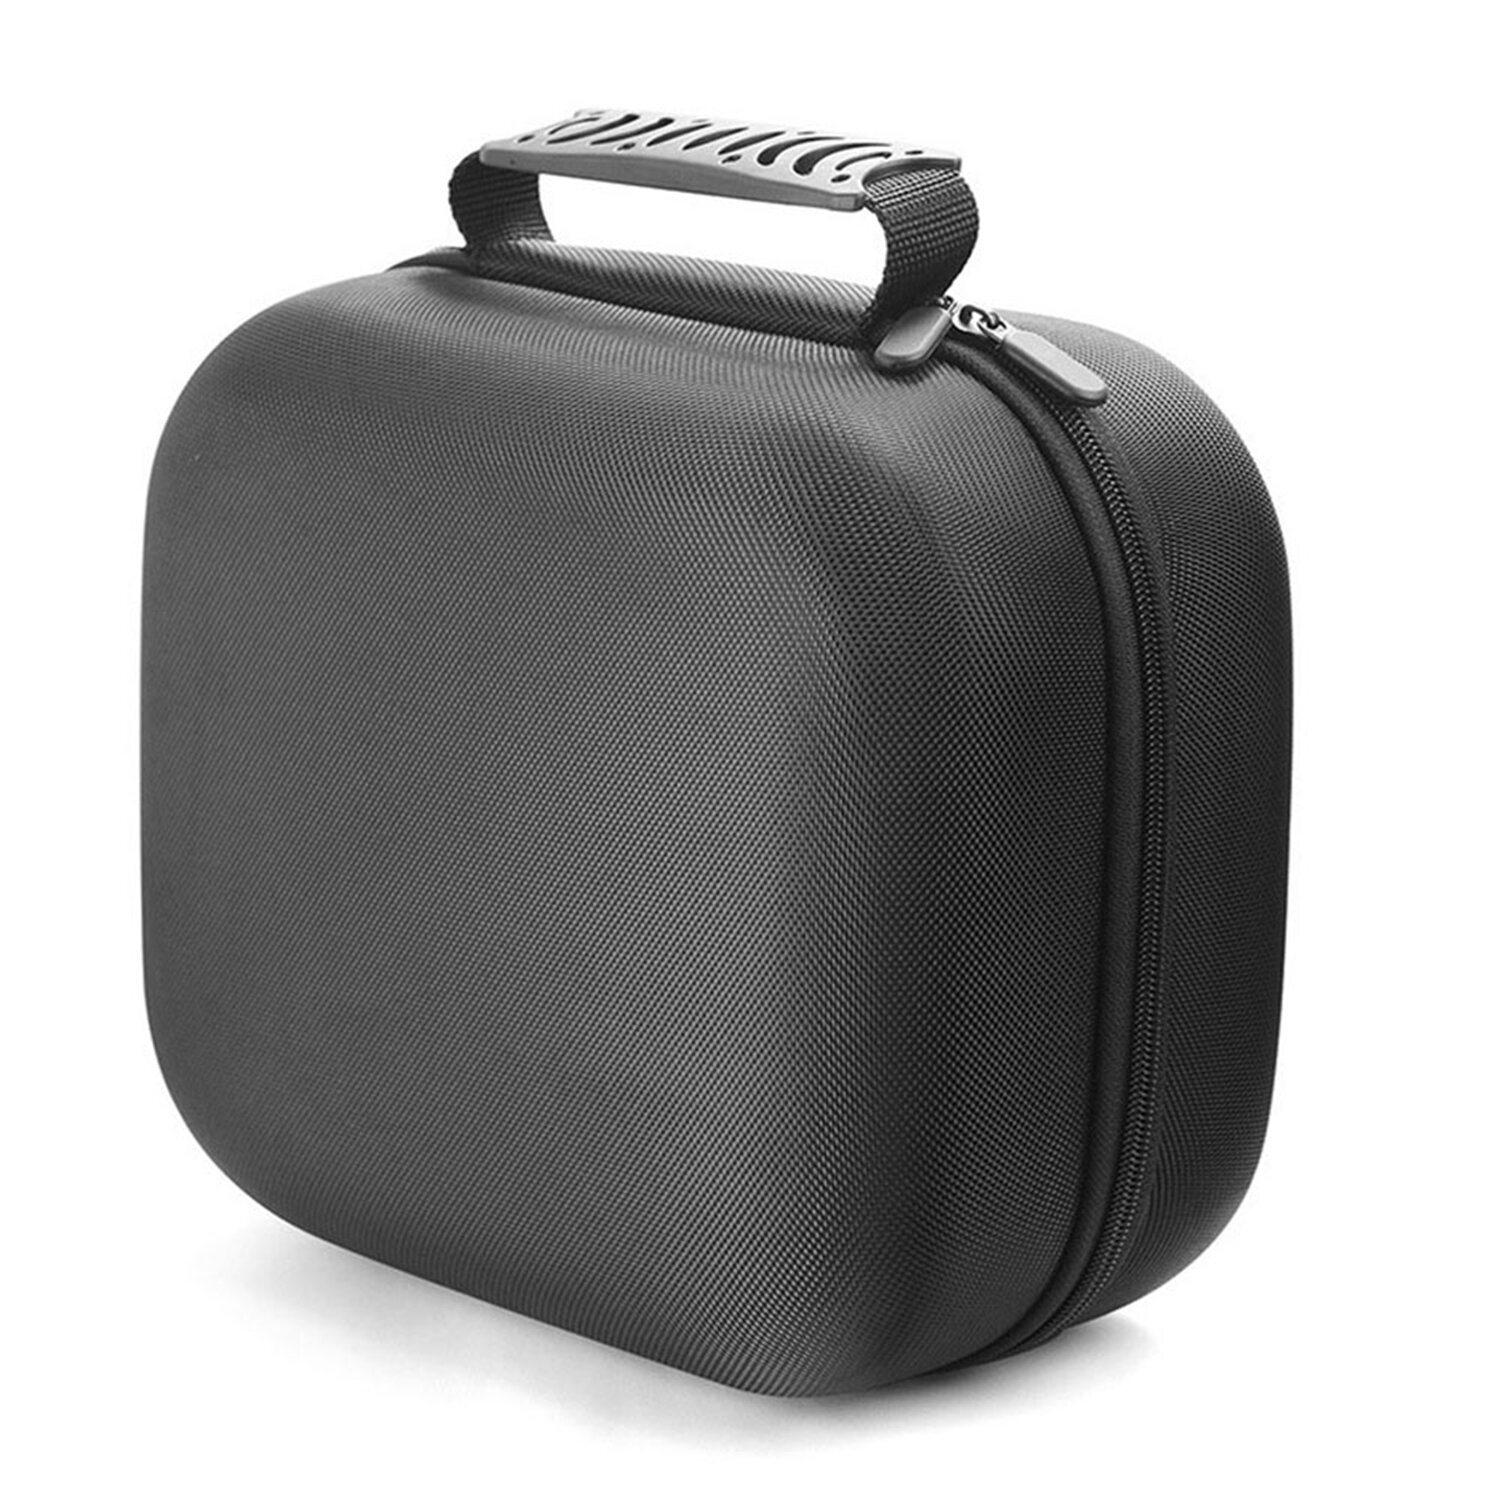 

Bakeey Earphone Carrying Case Shockproof Hard Portable Headphone Storage Bag Protective Box for Beats Pro